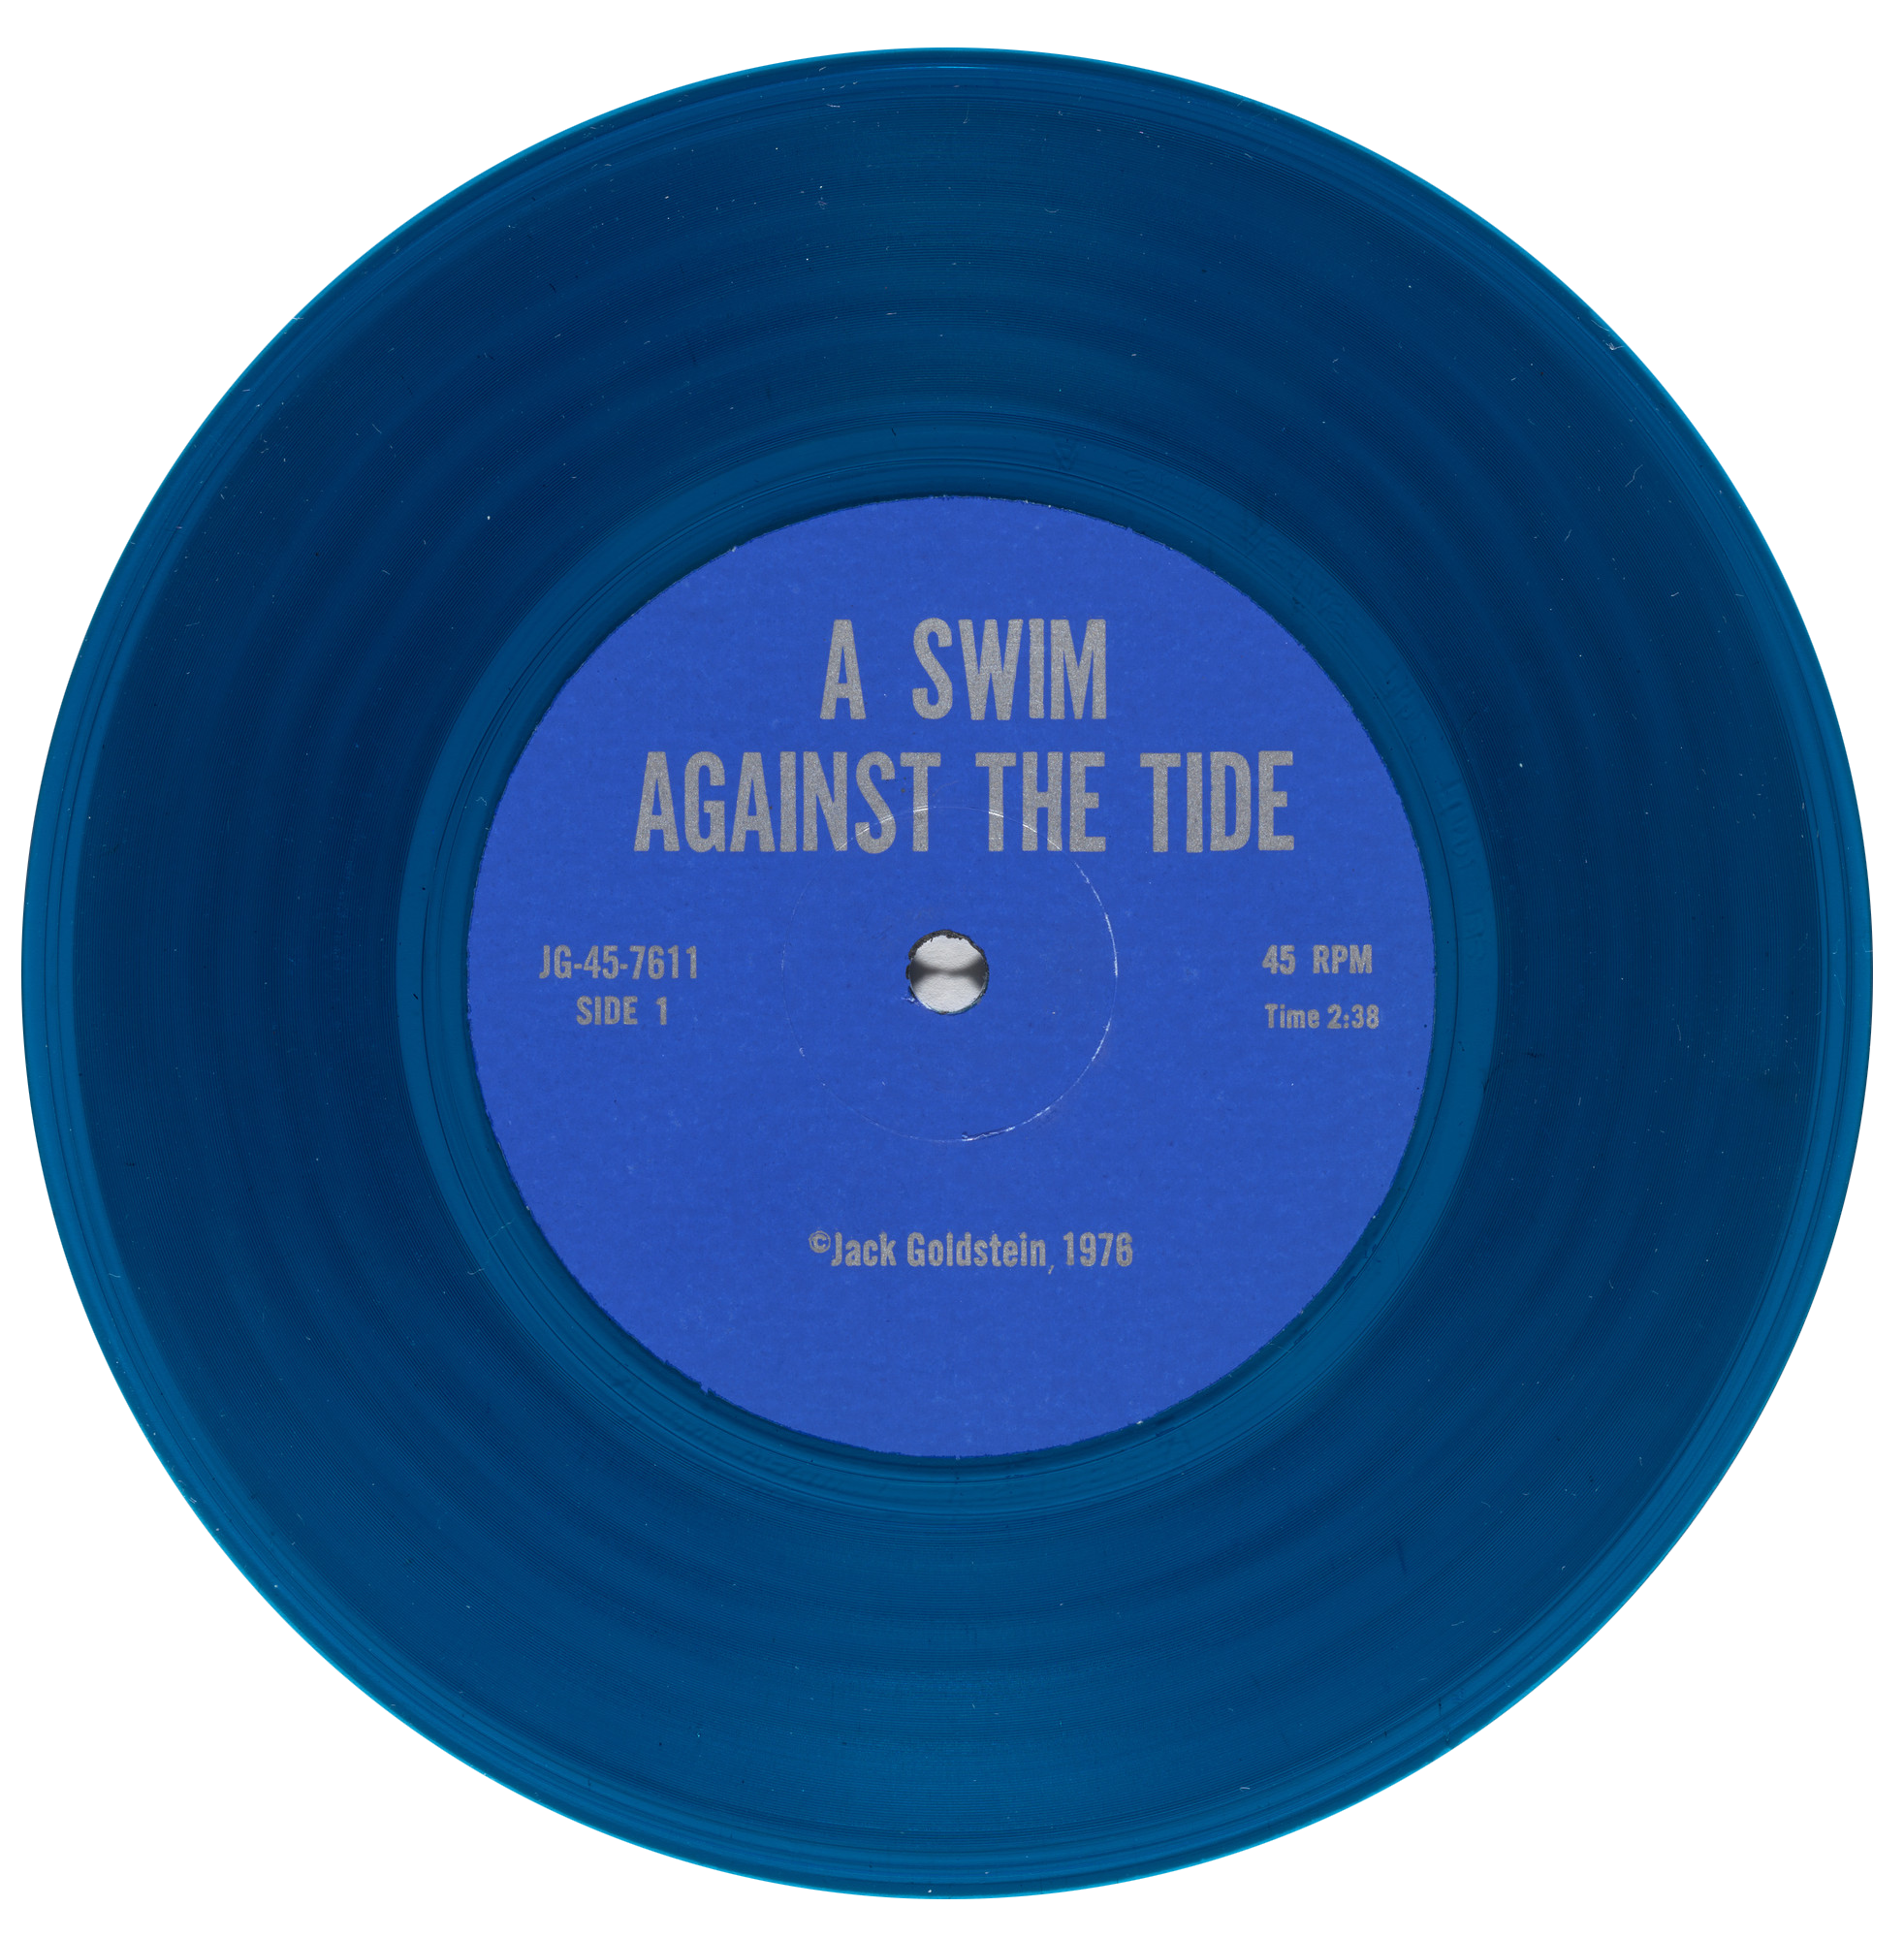  A SWIM AGAINST THE TIDE
Blue vinyl - 45 rpm 7-inch record

A Swim Against The Tide is one of the nine components of :
A Suite of Nine 45 rpm 7-Inch Records with Sound Effects
1976